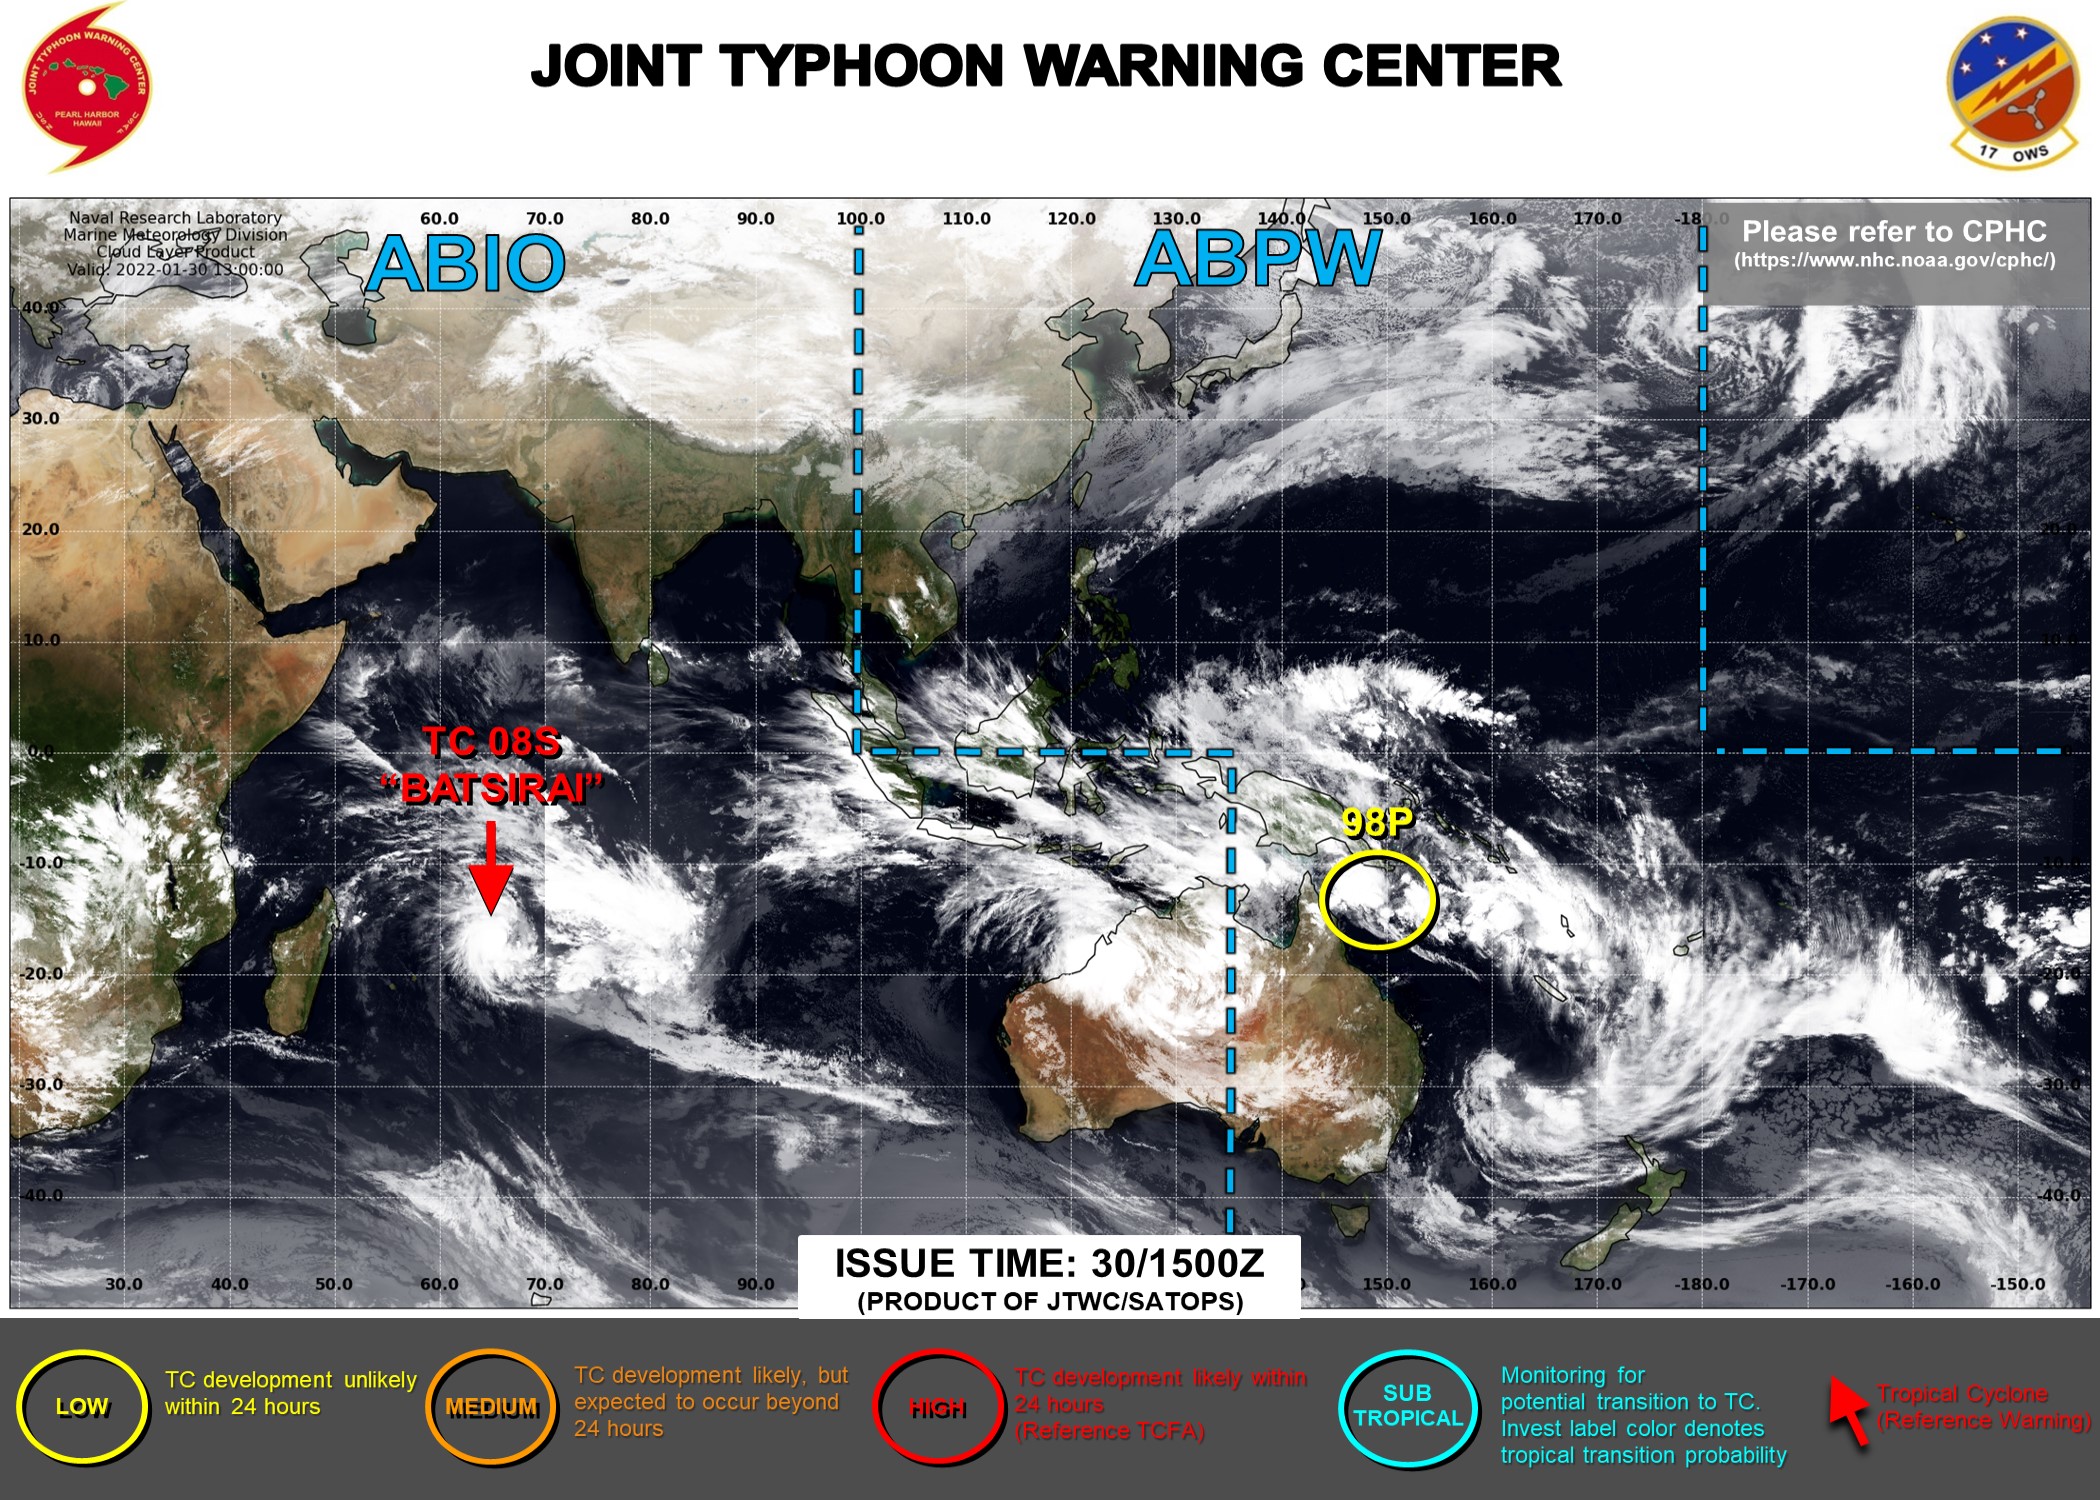 JTWC IS ISSUING 12HOURLY WARNINGS ON TC 08S(BATSIRAI) AND 3HOURLY SATELLITE BULLETINS ON 08S AND INVEST 98P.